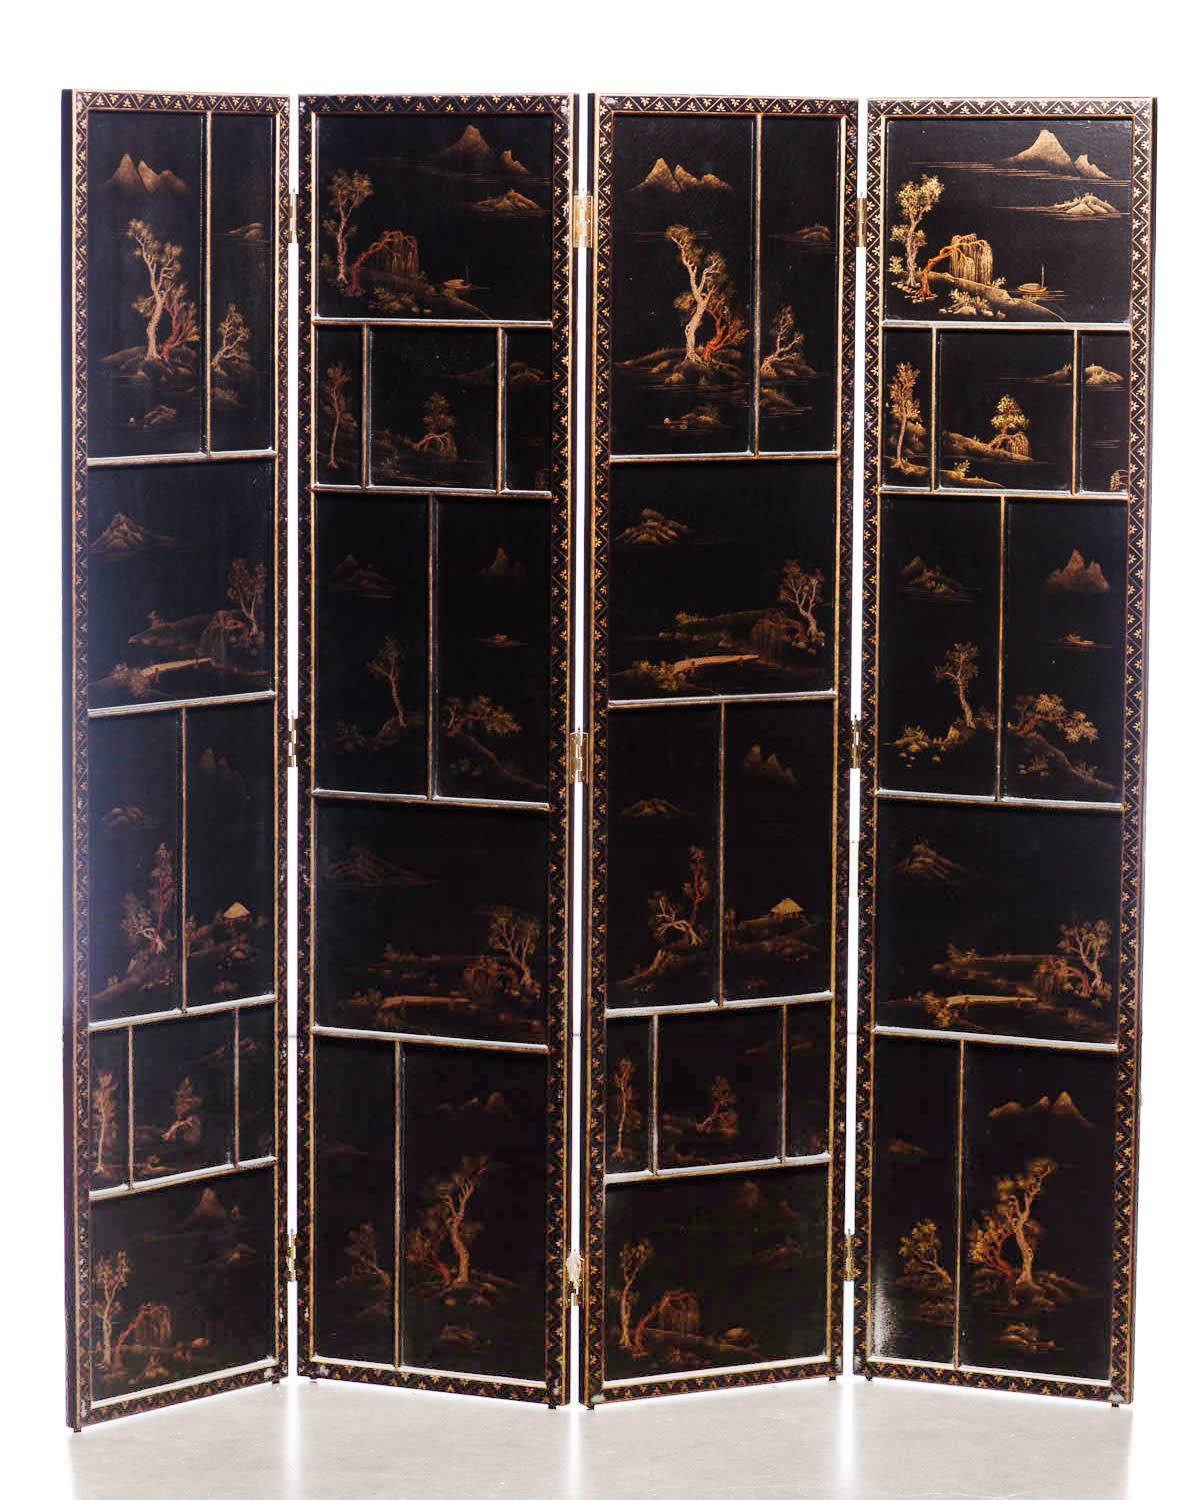 Lawrence & Scott Japanese Large Four-Panel Kano Style Landscapes Screen Room Divider